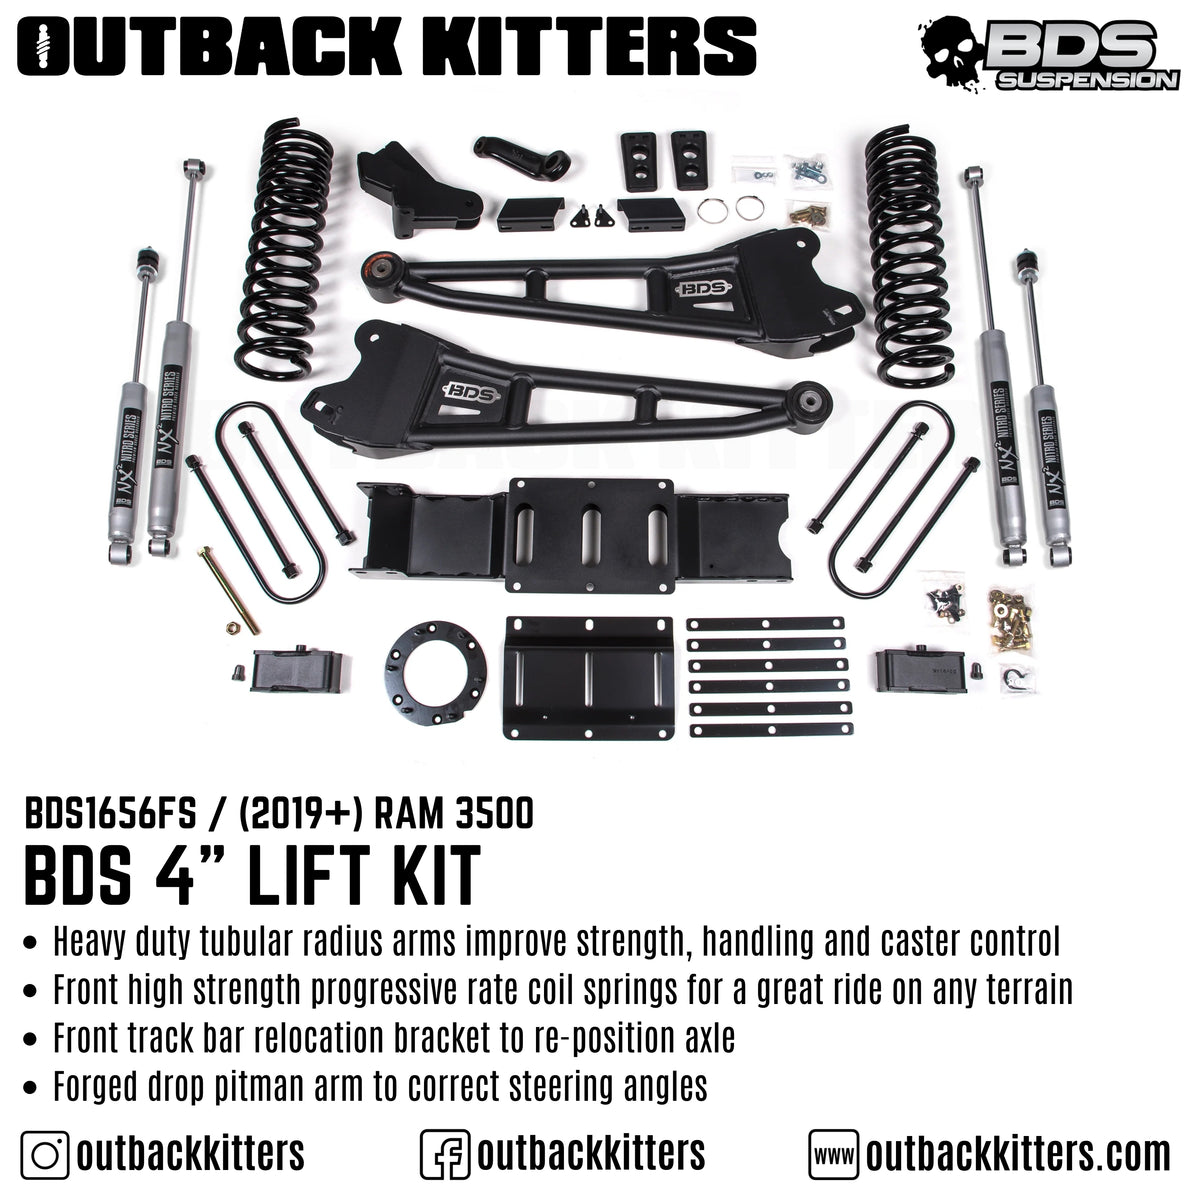 BDS Suspension 4" Lift Kit for 2019+ Ram 3500 with Fox Shocks - Outback Kitters